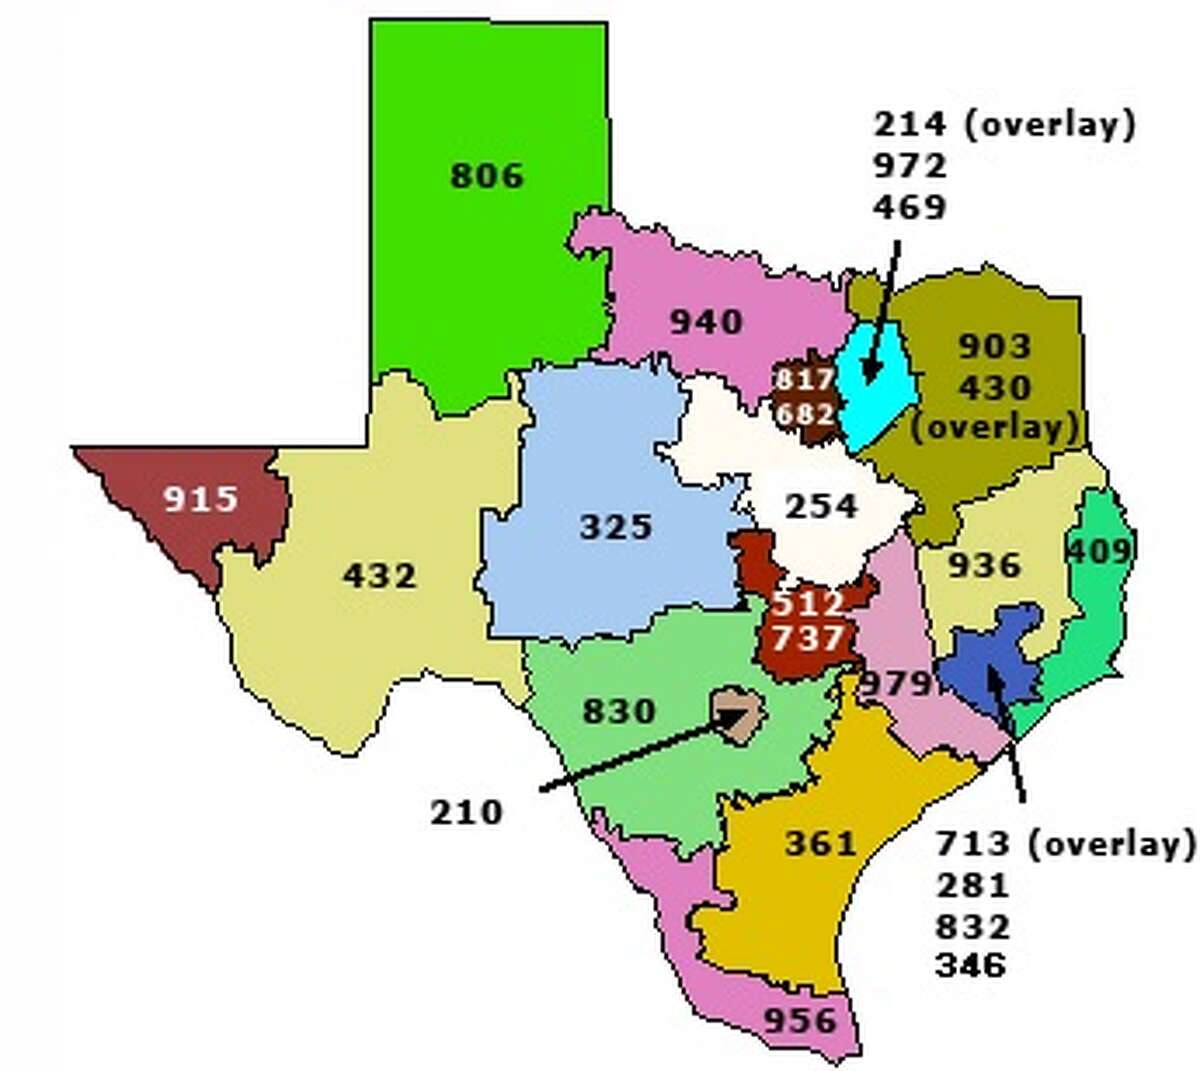 San Antonio Assigned New 726 Area Code In Addition To 210 Will Be Rolled Out In 18